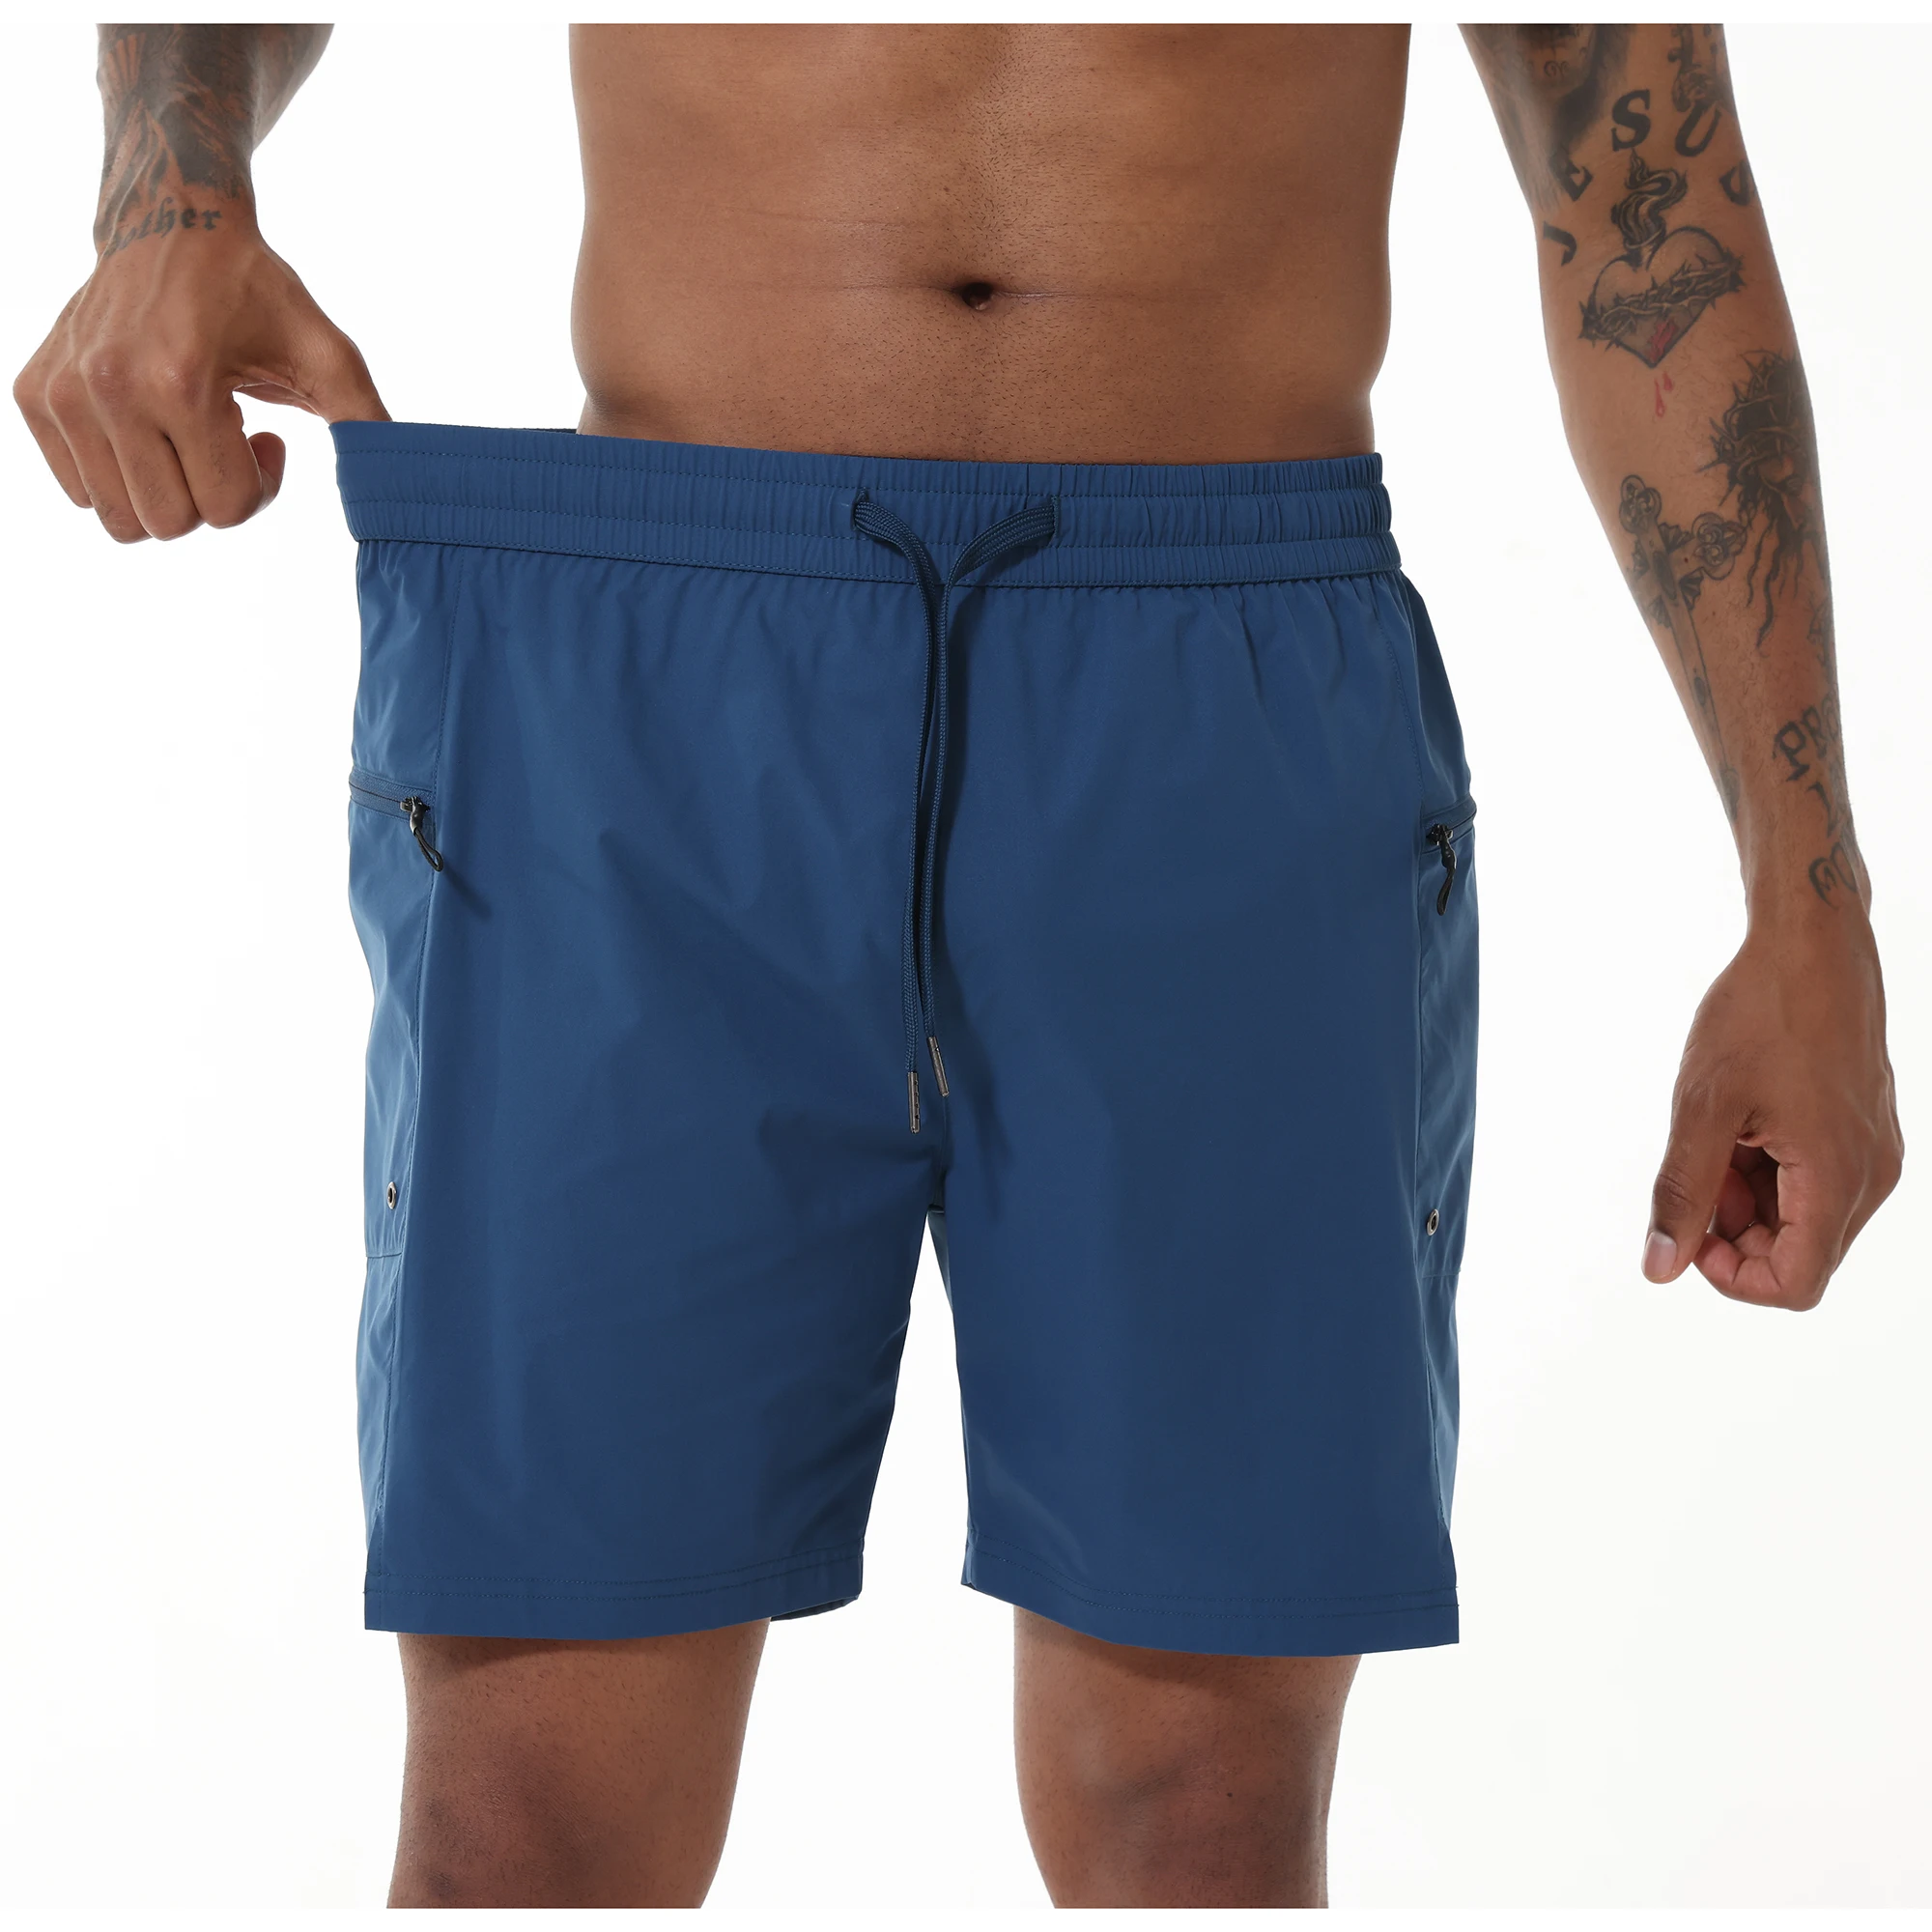 Man stretching out the elastic waistband of his blue swim shorts.